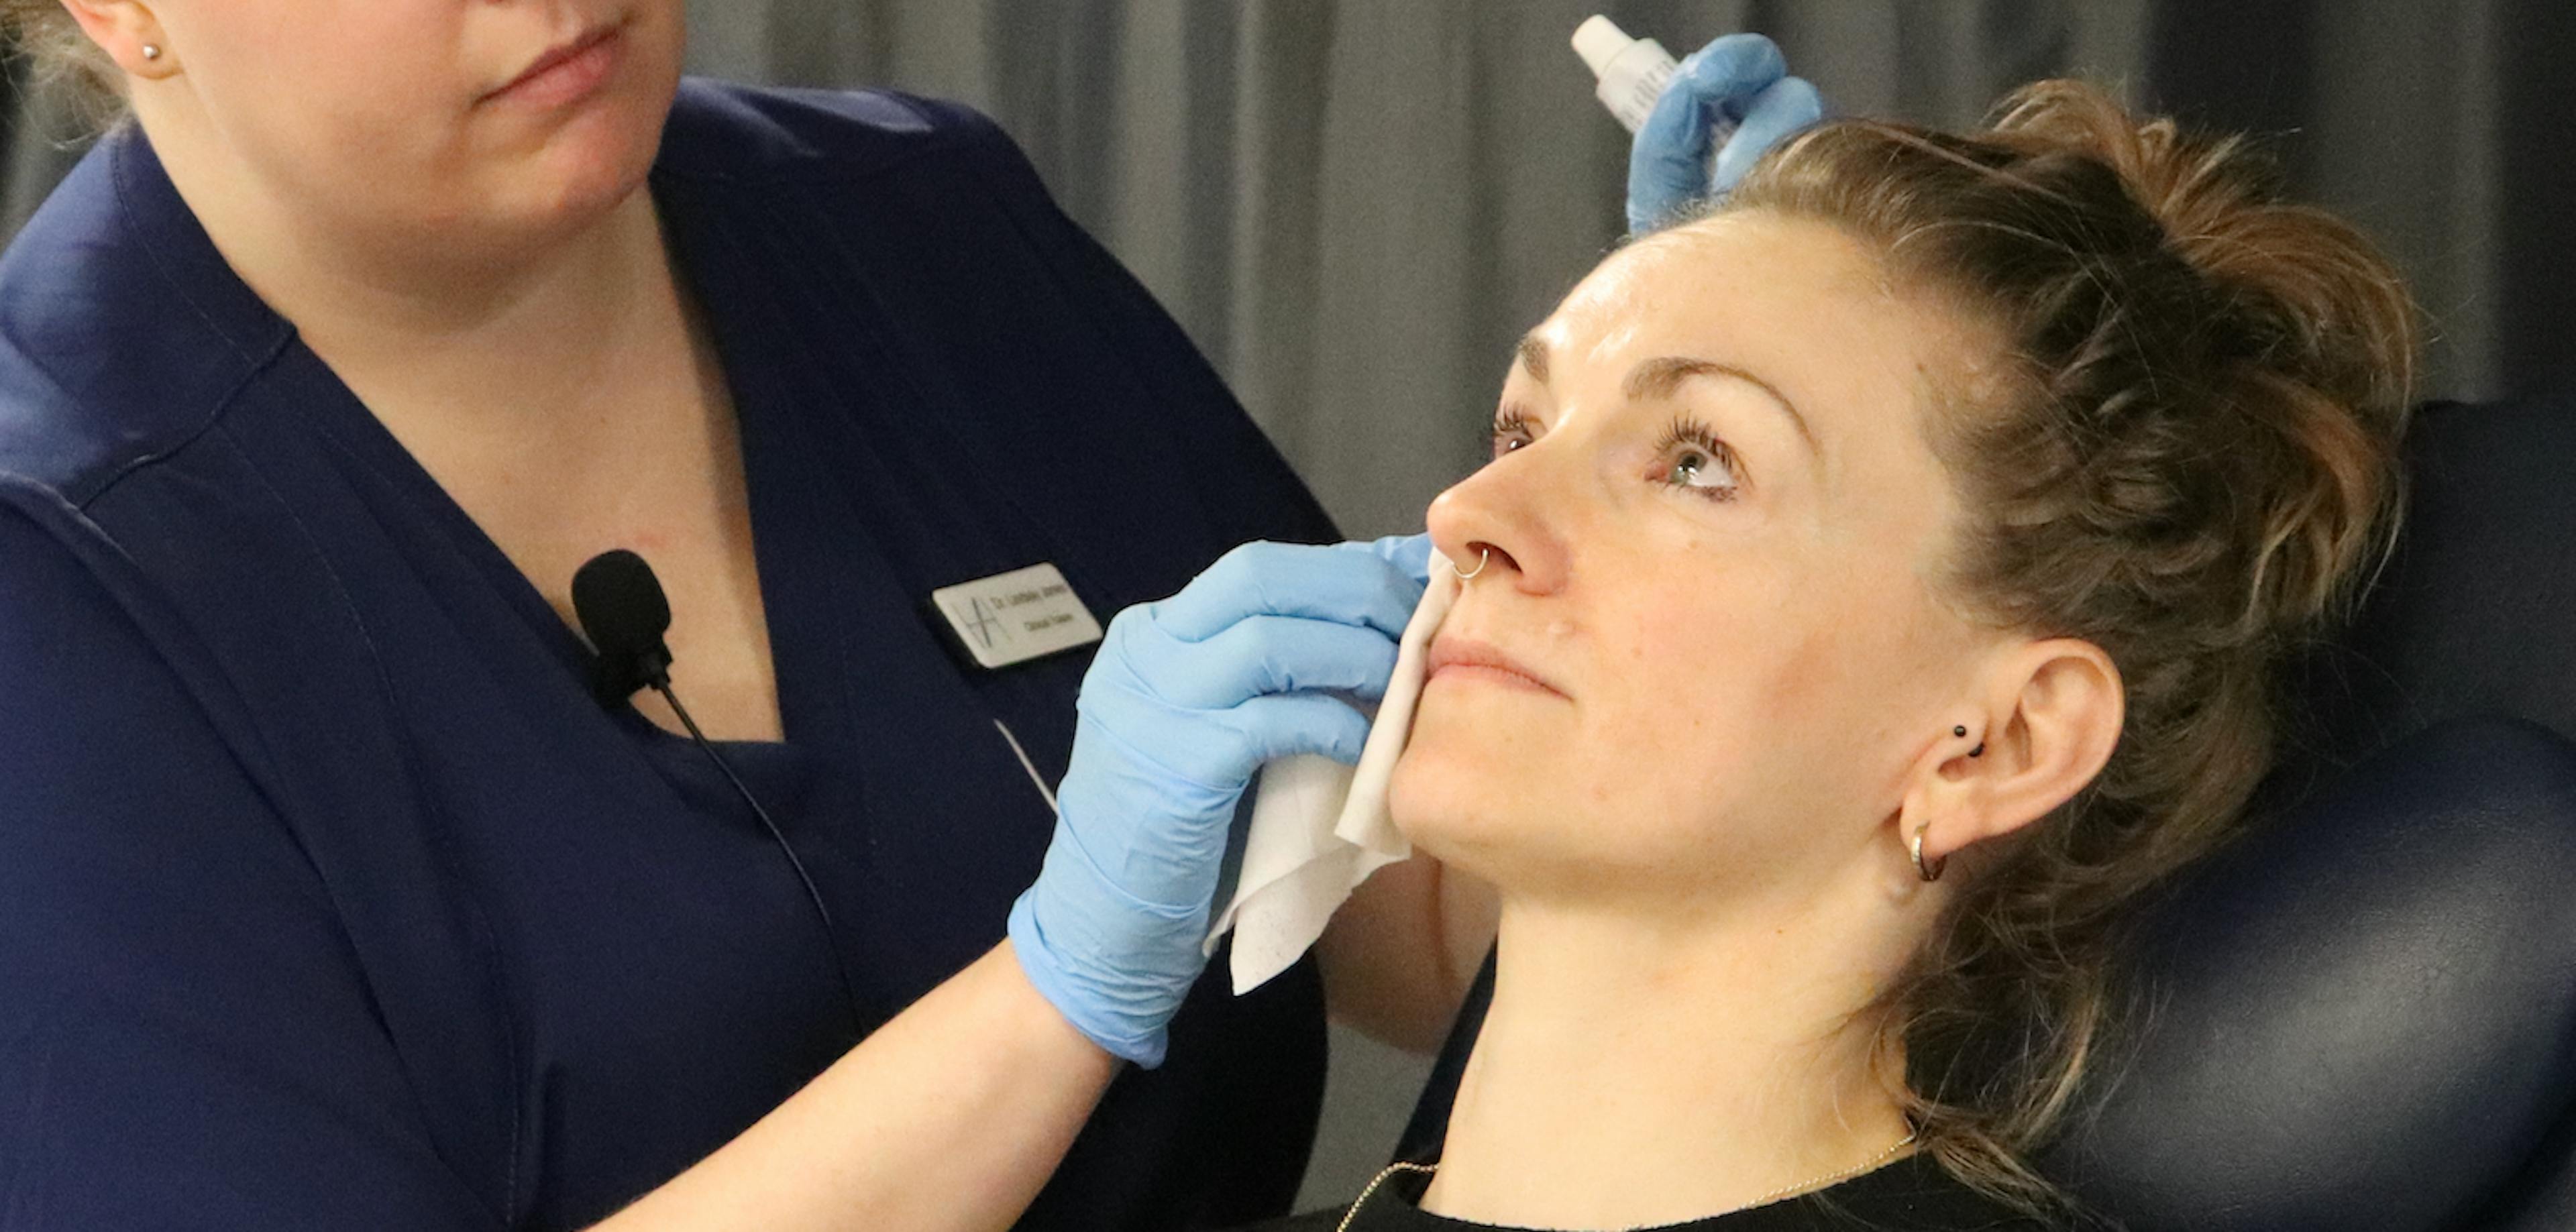 How to clean Aesthetics Patients’ faces properly